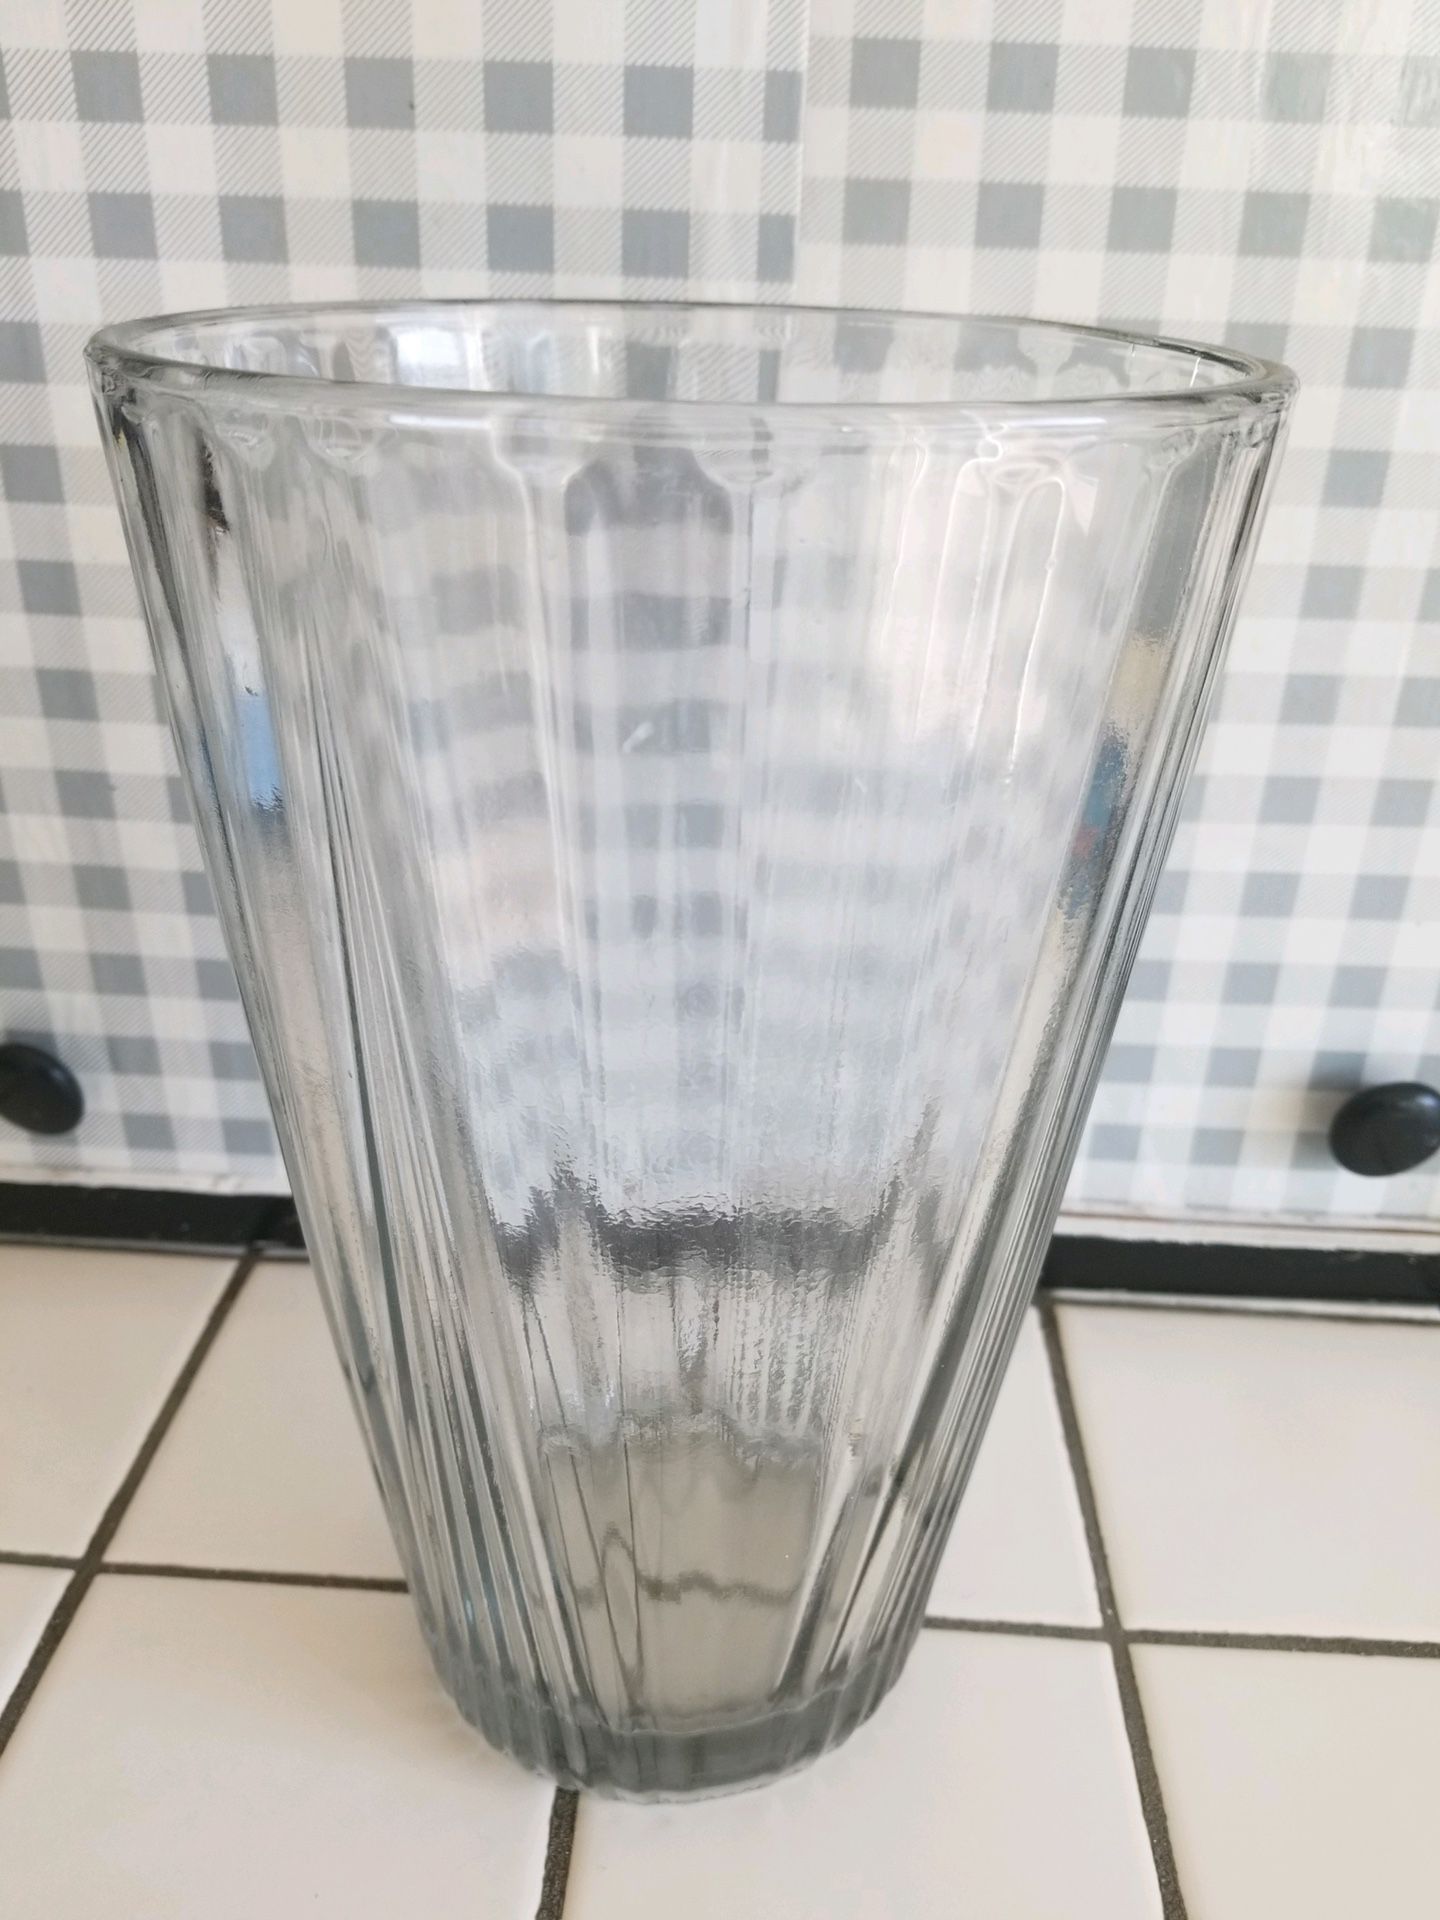 Glass vase (I have 2 of these). 10" tall x 6.5" wide at top.